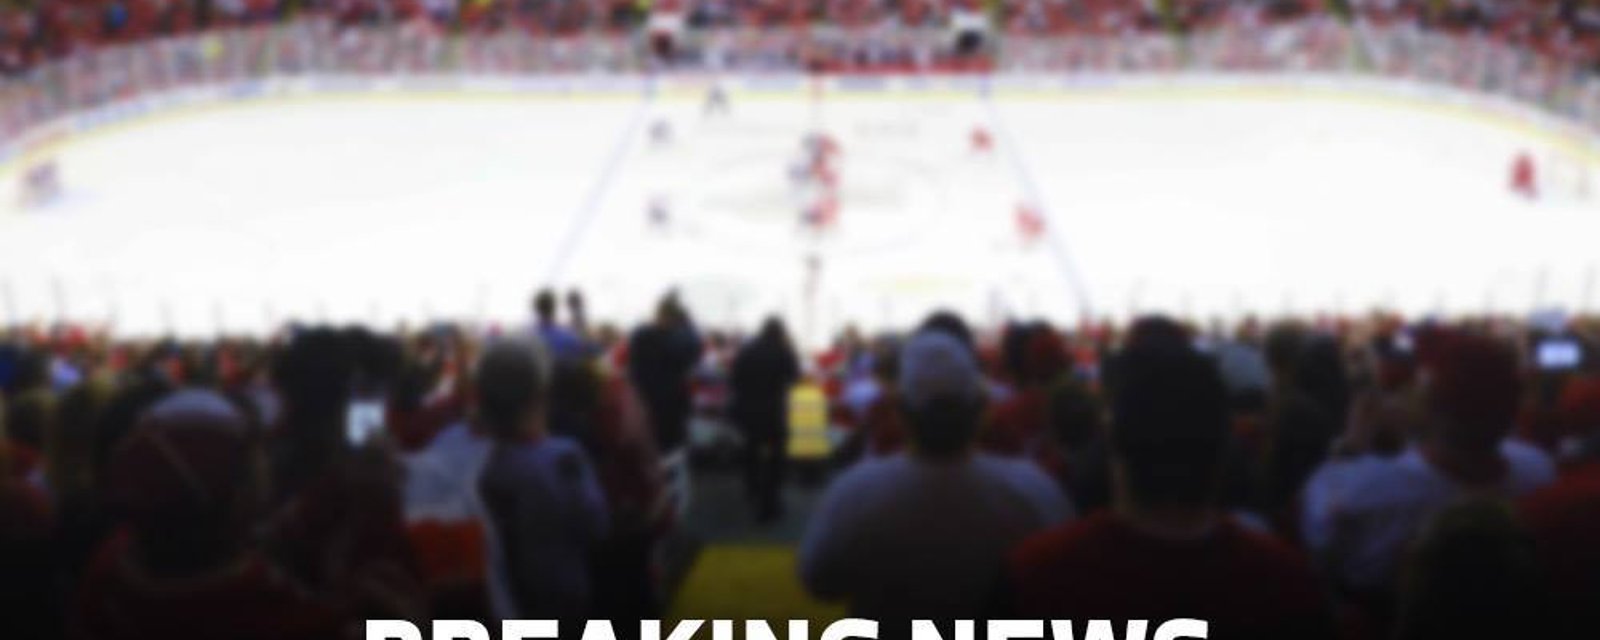 Breaking: NHL team fires coach, GM and two pro scouts.